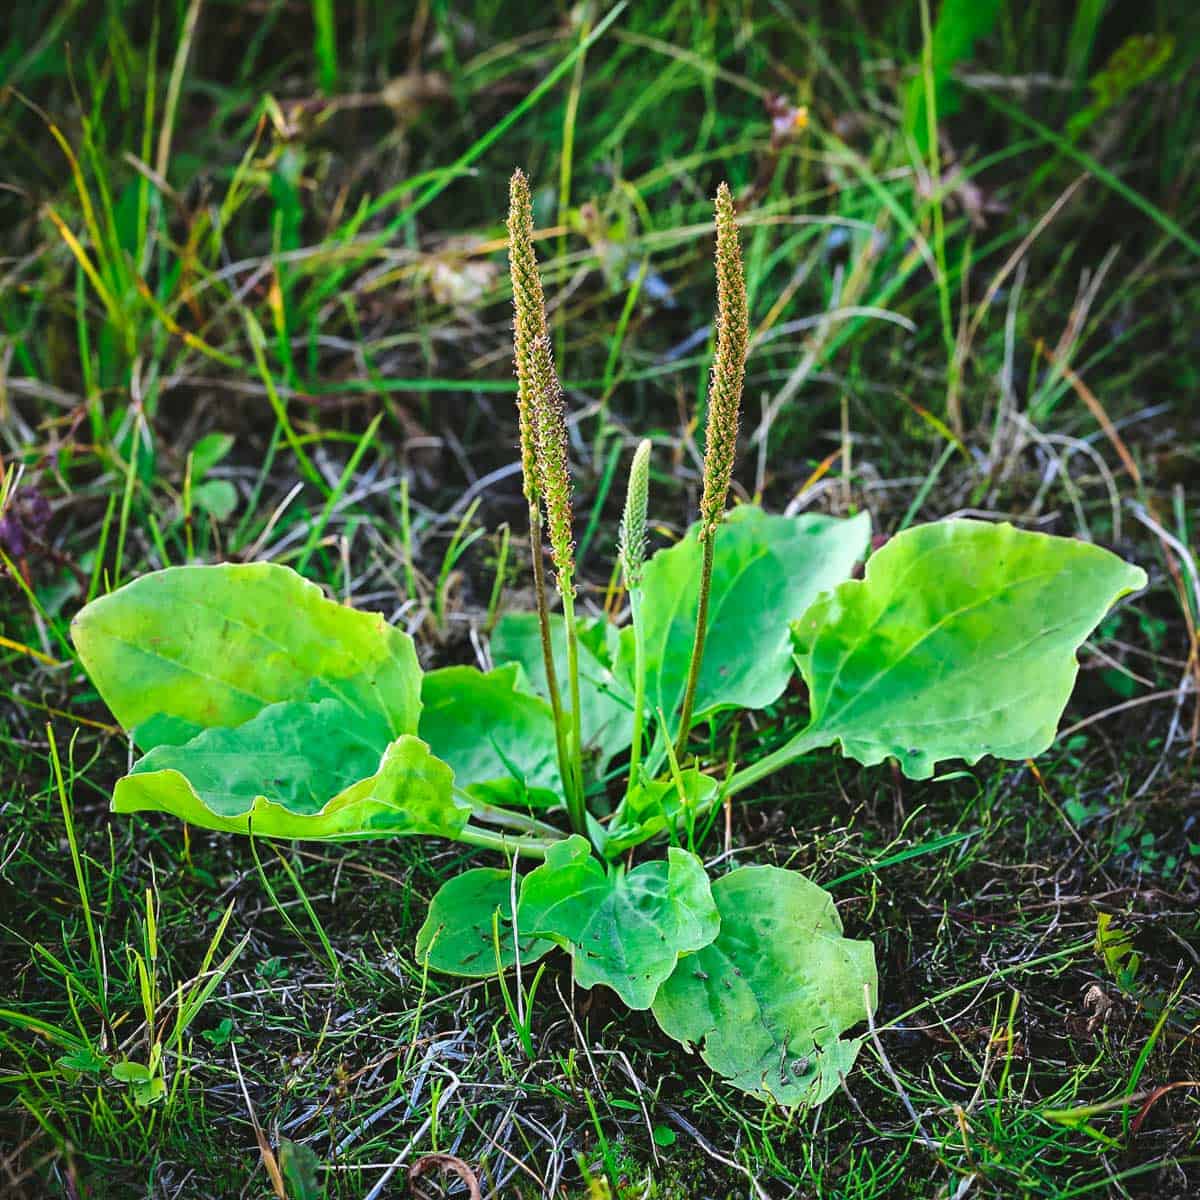 broadleaf plantain growing in the grass